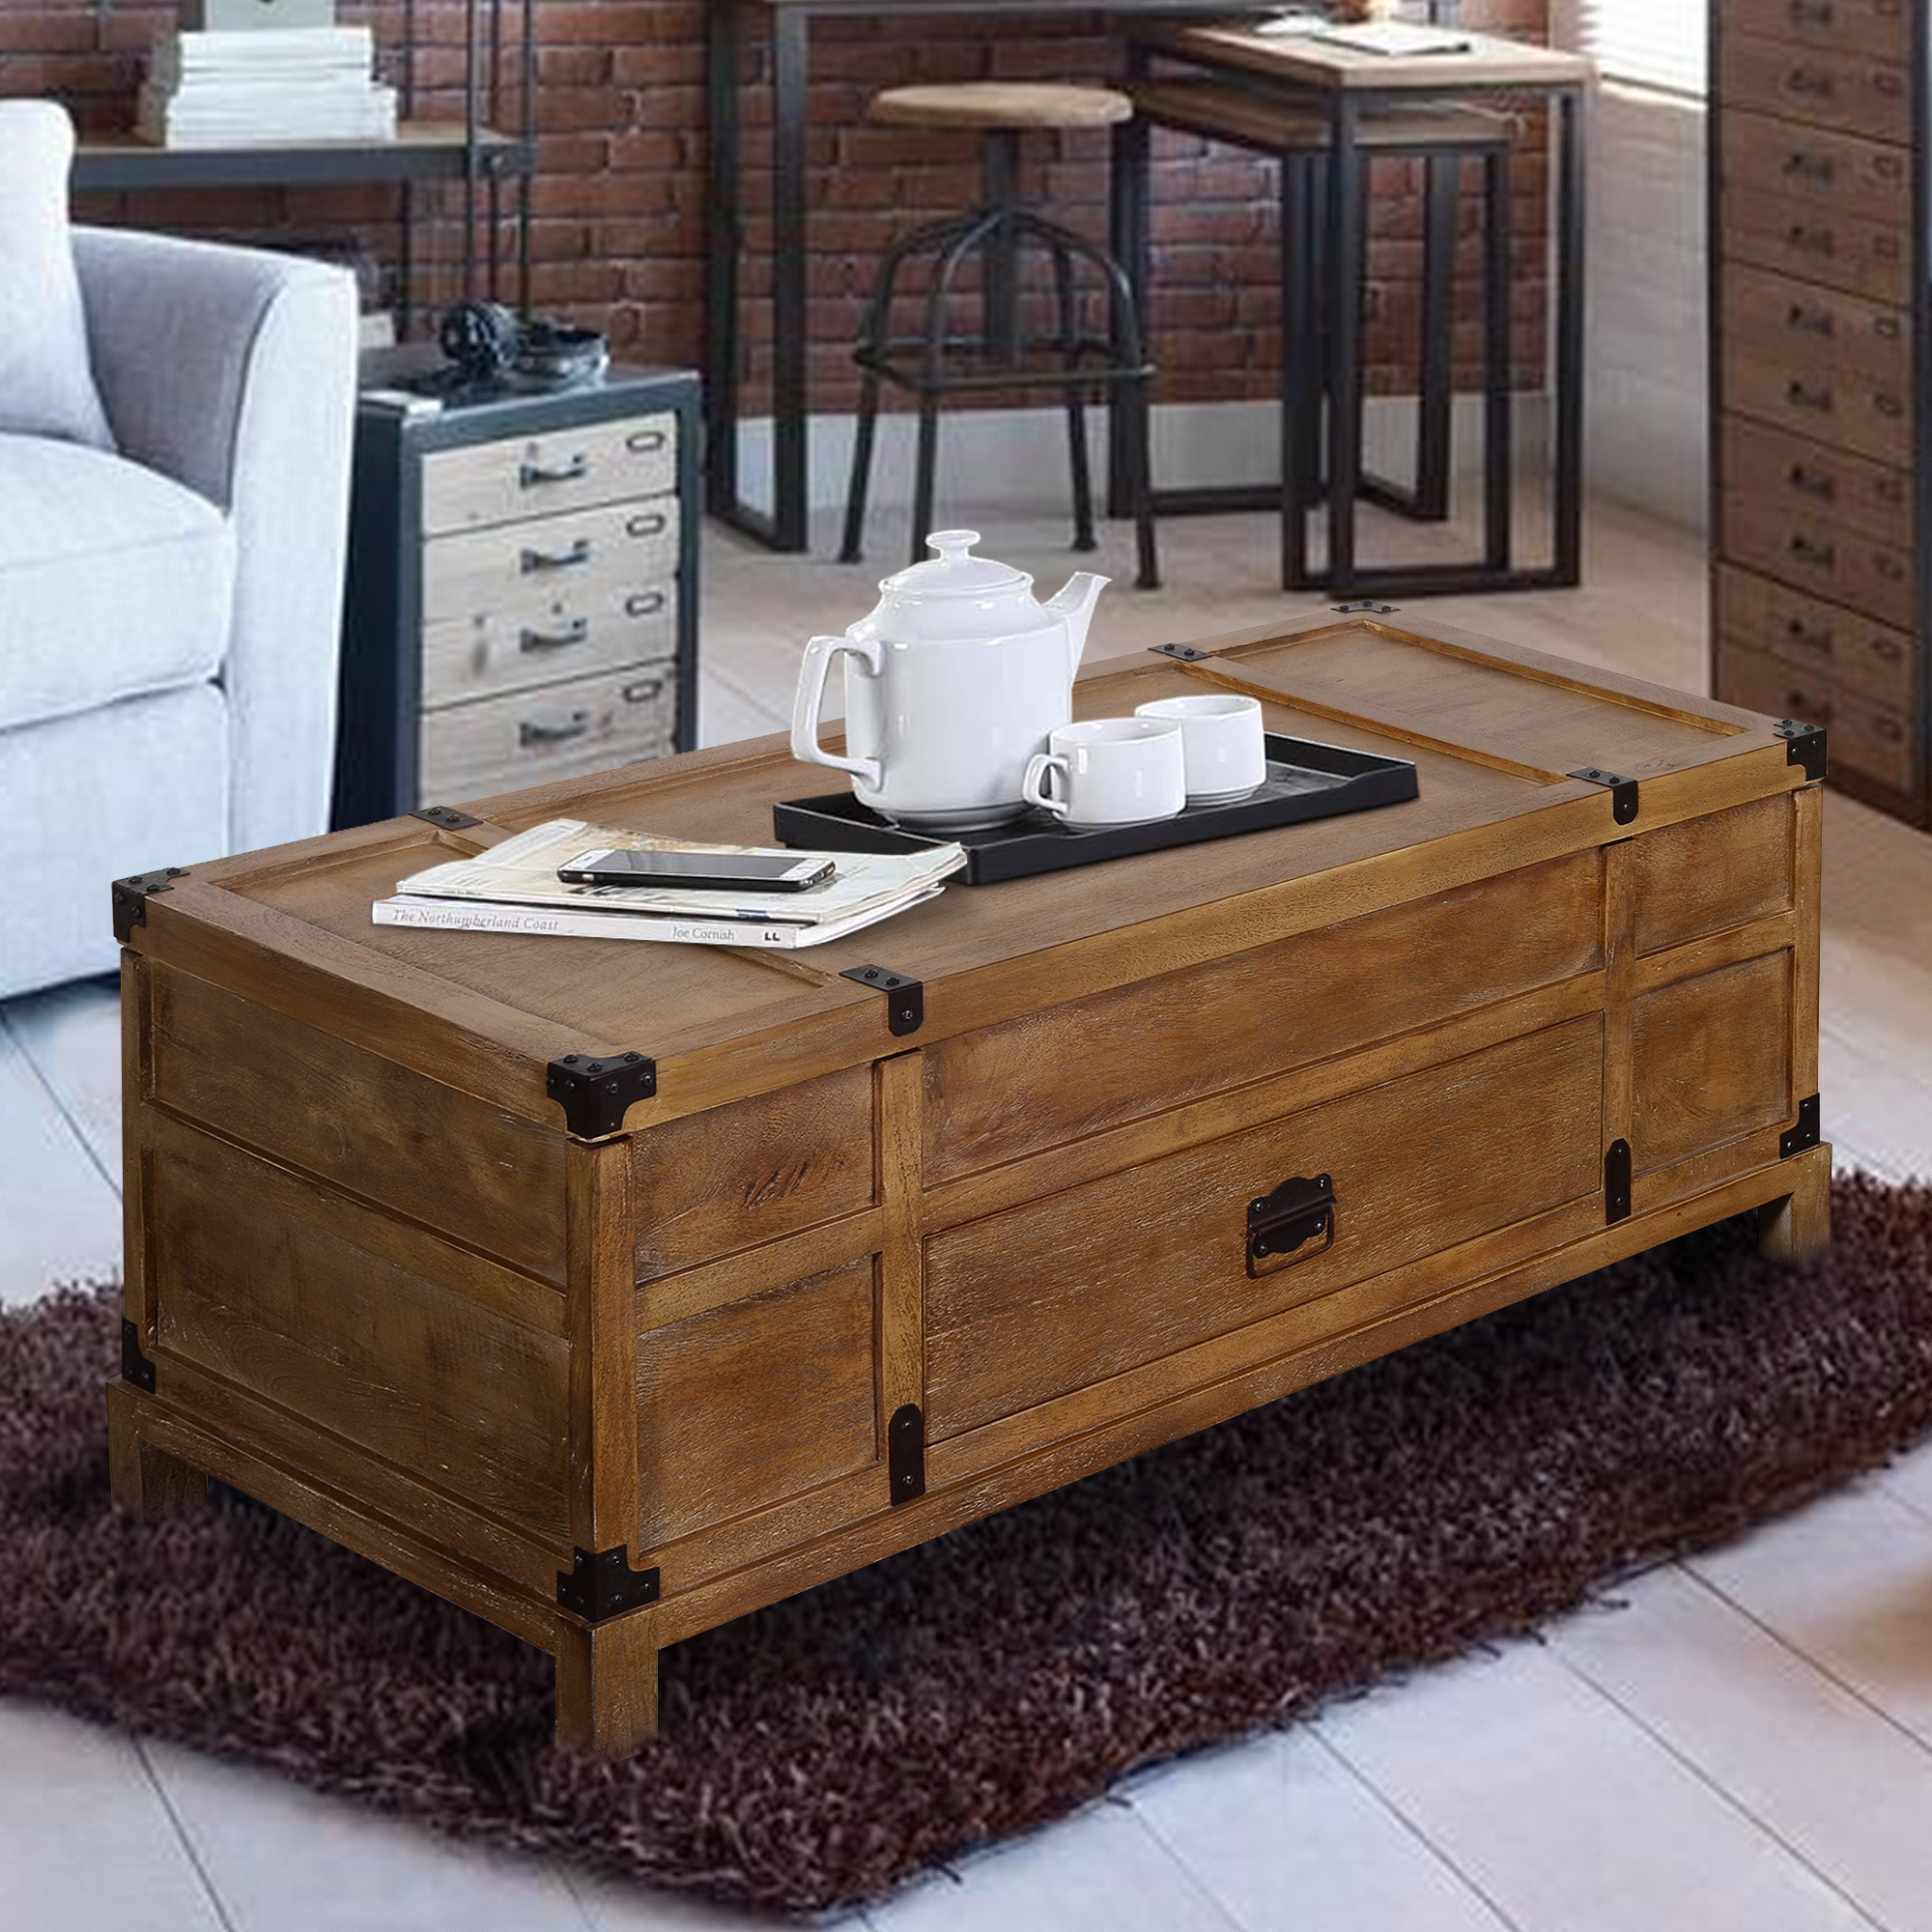 Rustic Single Drawer Mango Wood Coffee Table With Lift Top Storage & Compartments, Brown - Saltoro Sherpi